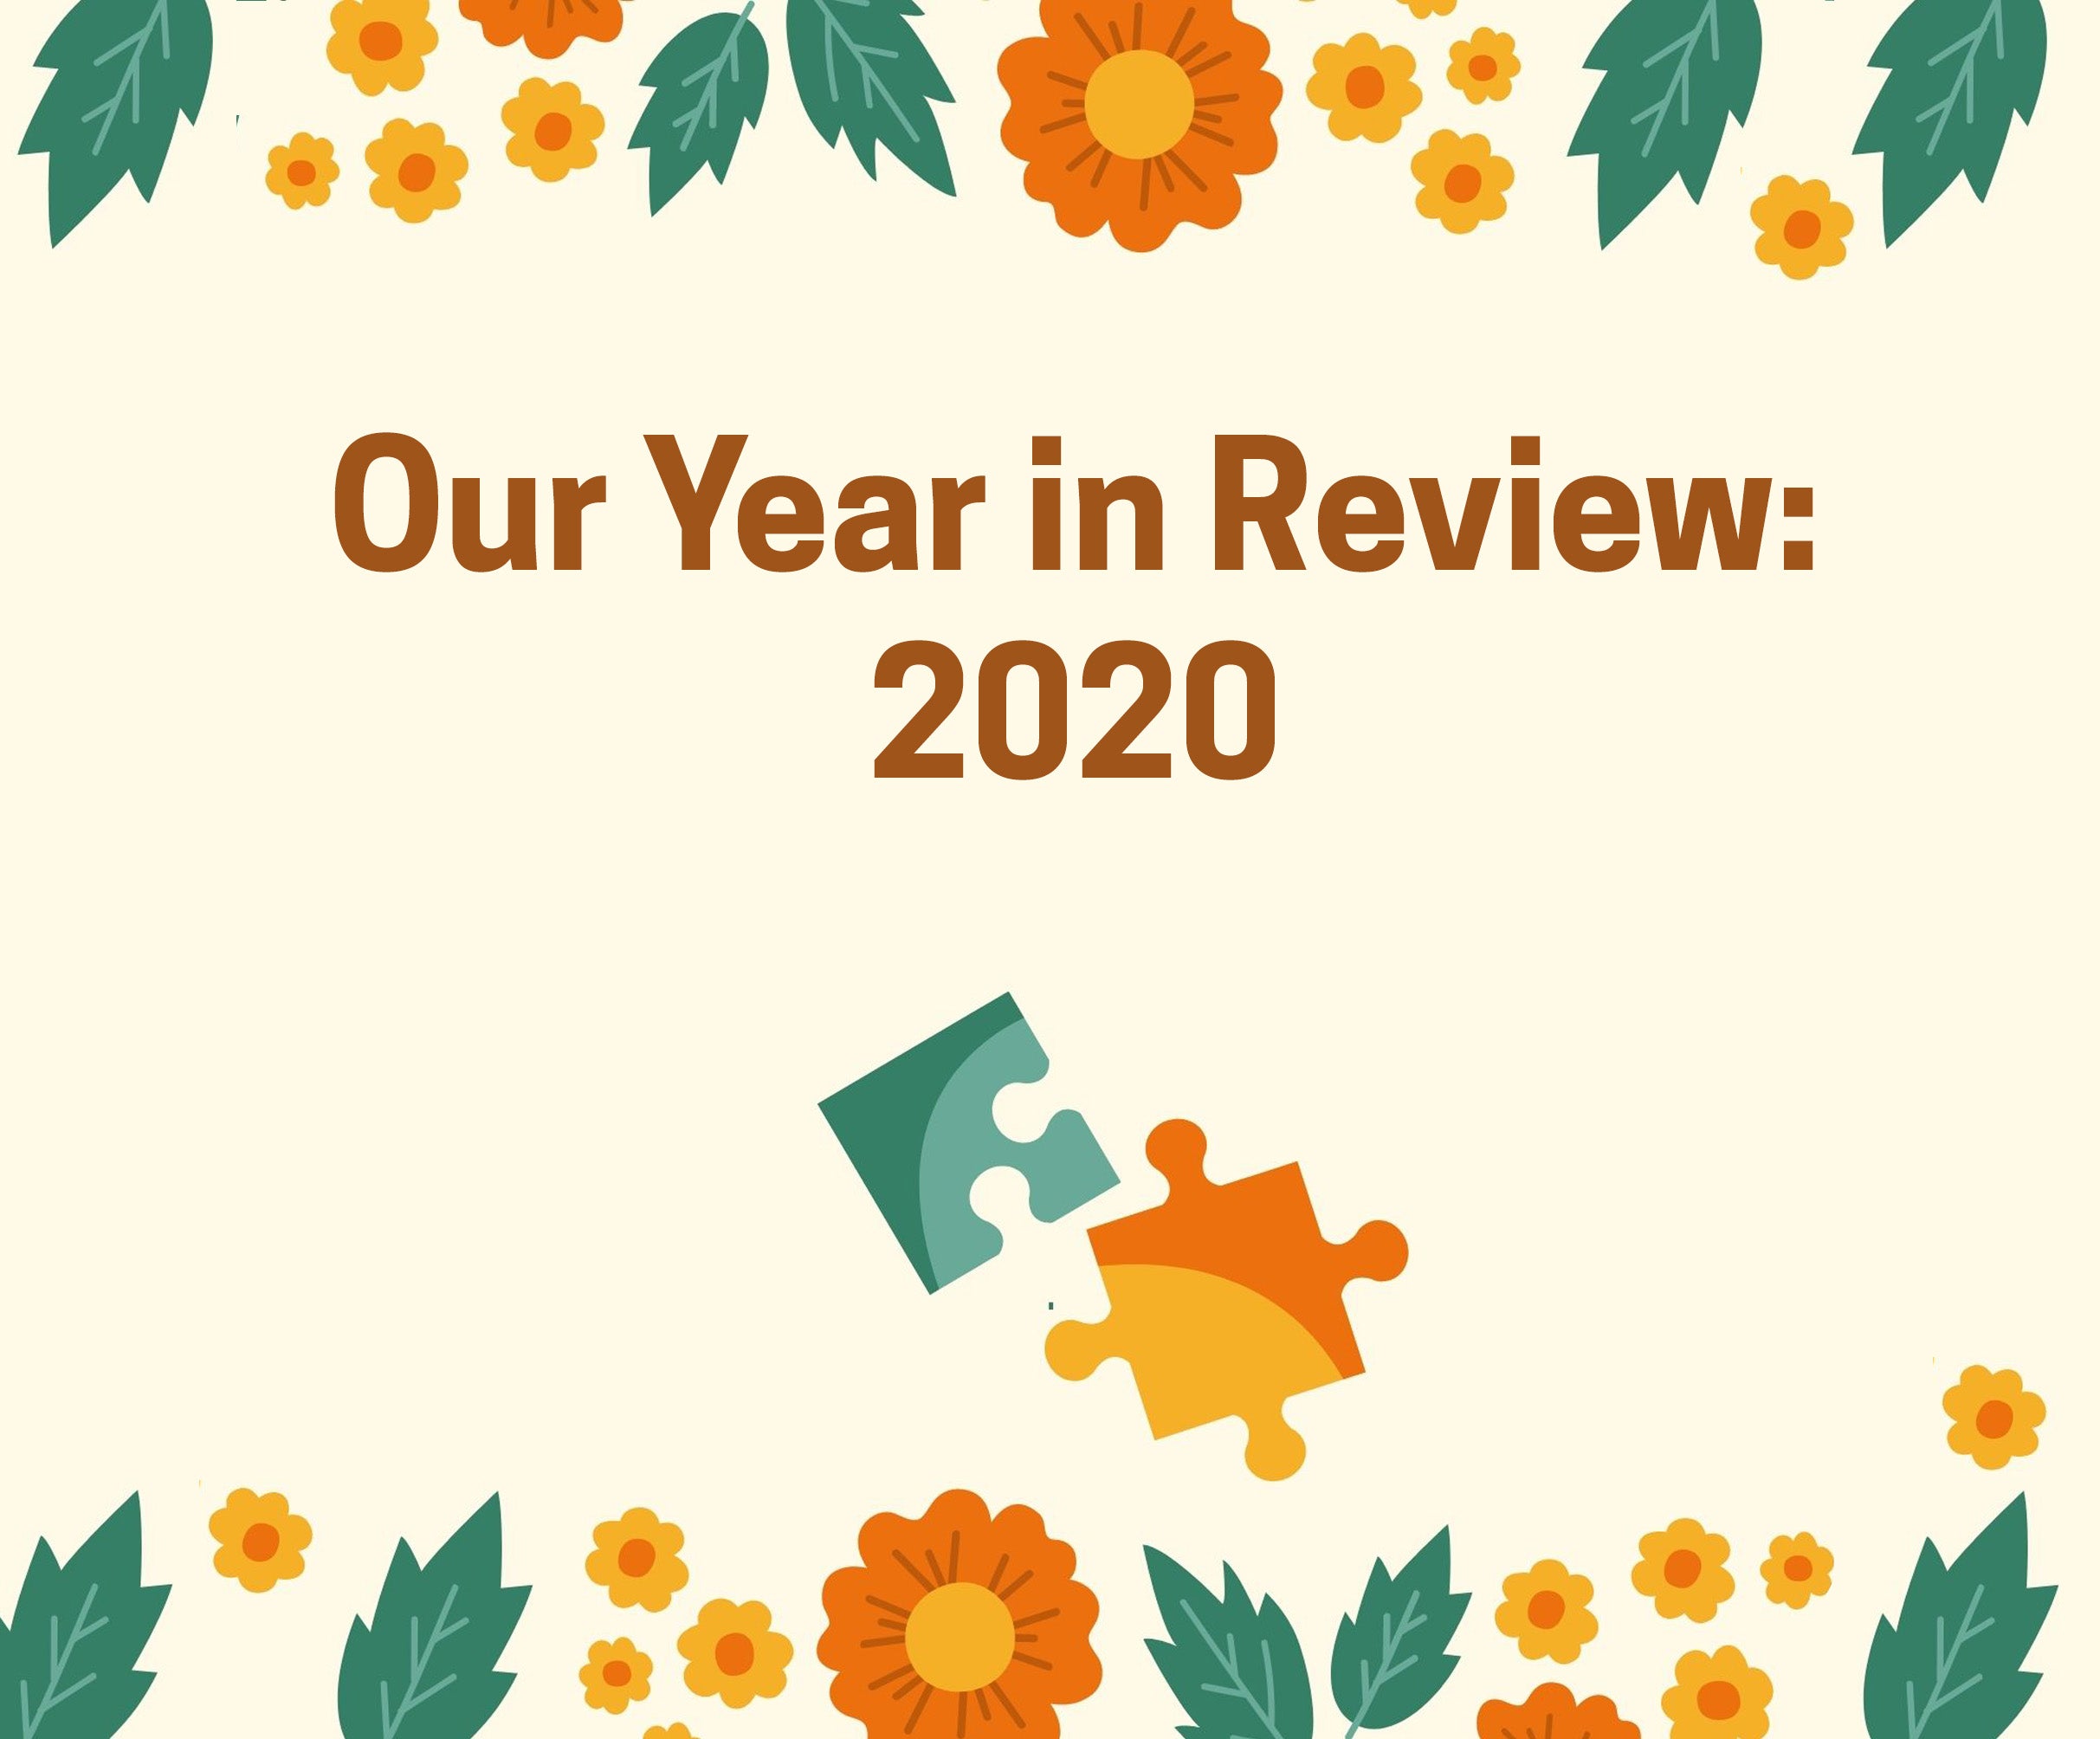 Our Year in Review: 2020